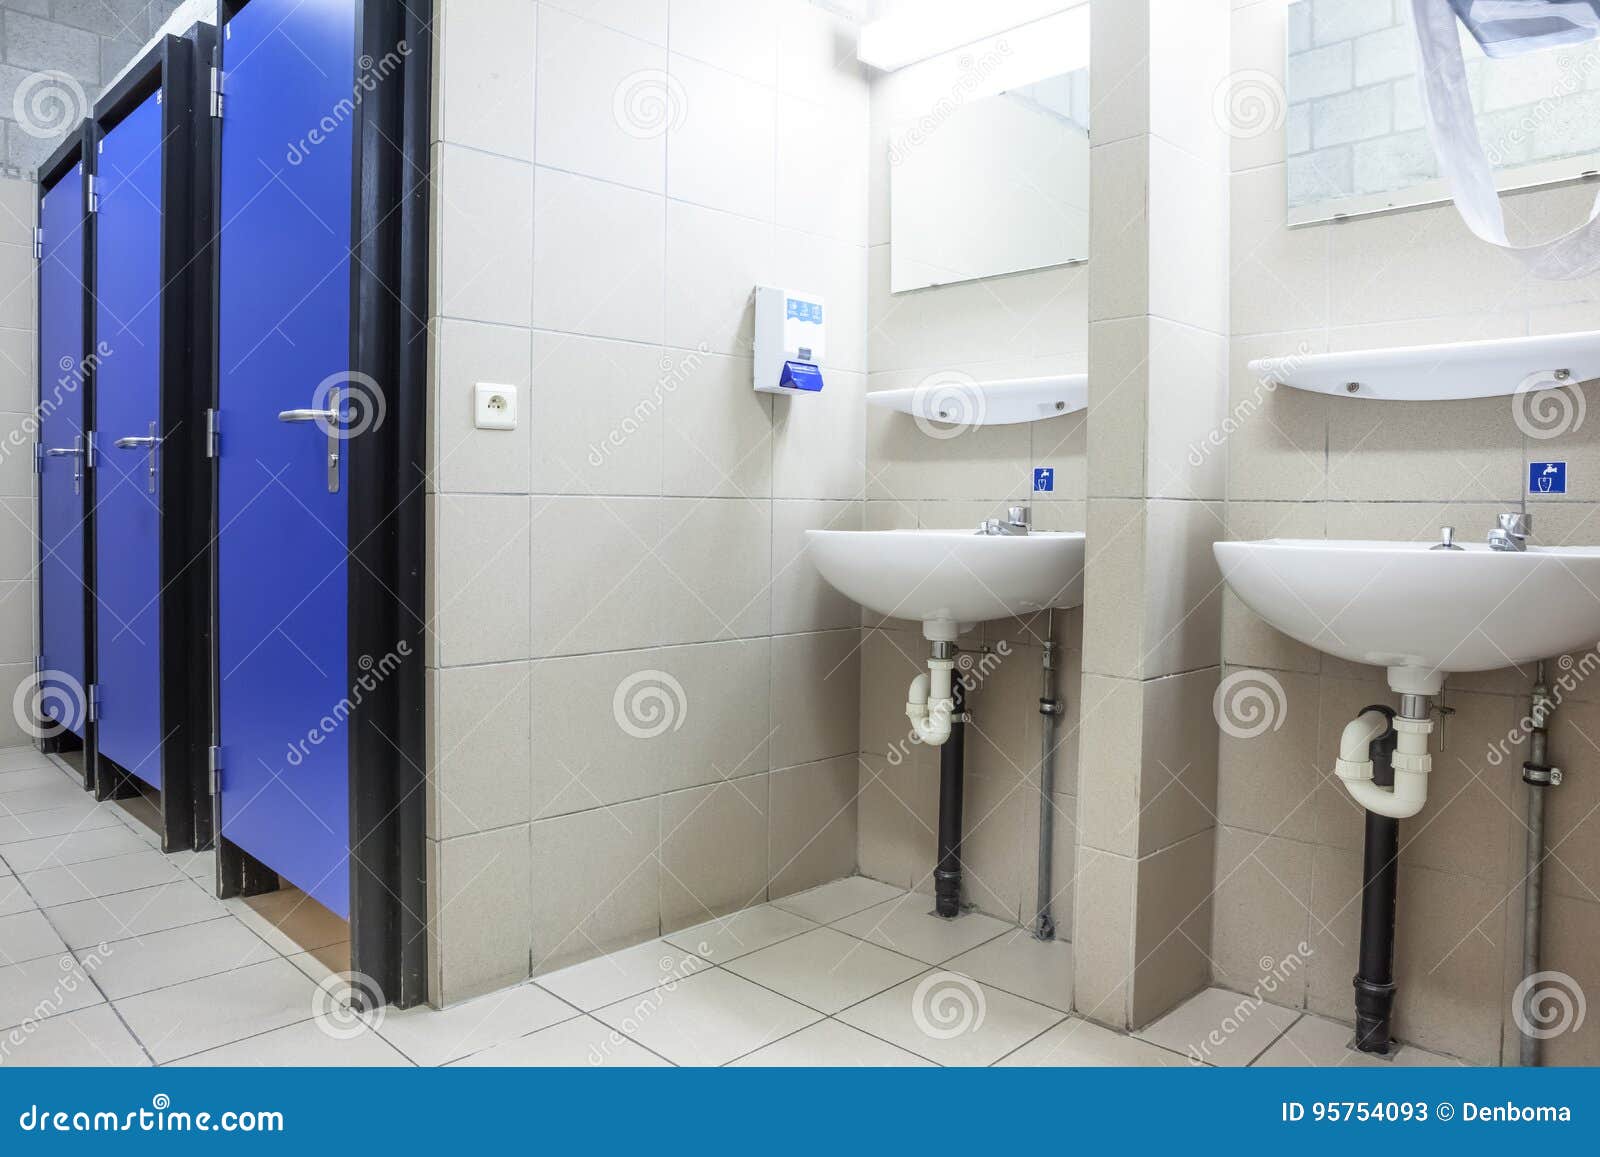 Doors From Toilets And Sinks Stock Image Image Of